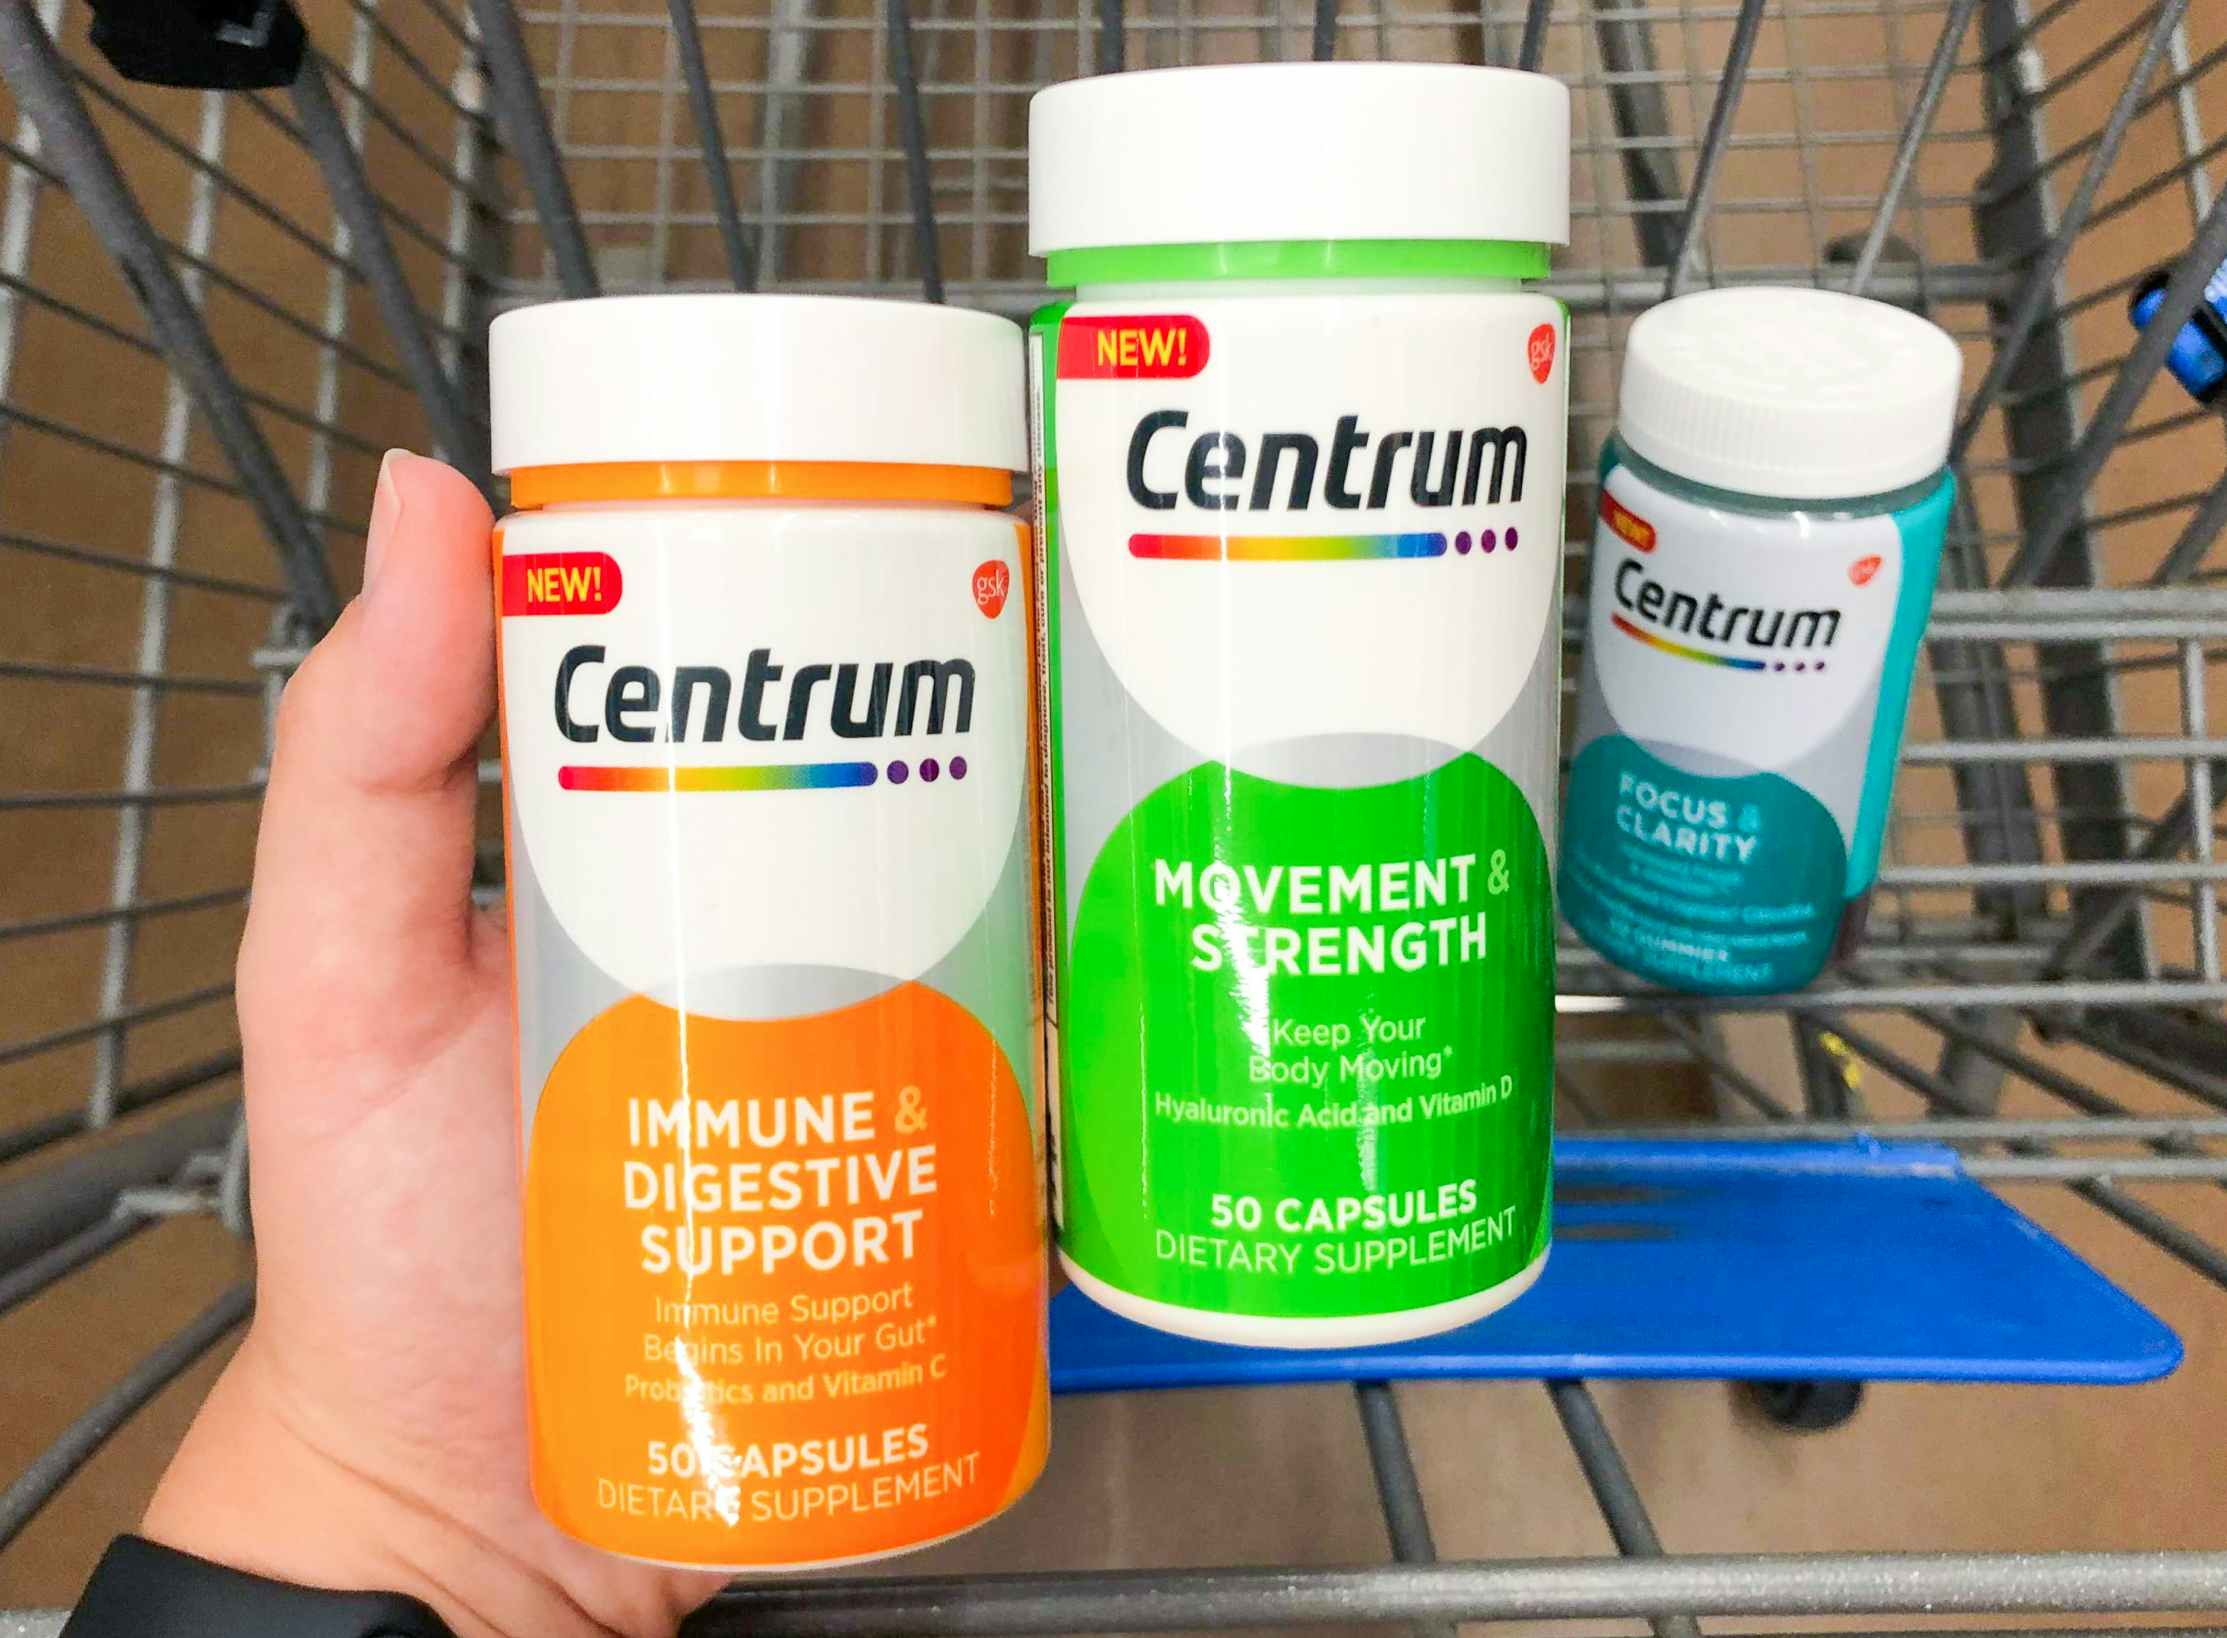 A person's hand holding two bottles of Centrum vitamins over a shopping cart basket with another bottle sitting in it.